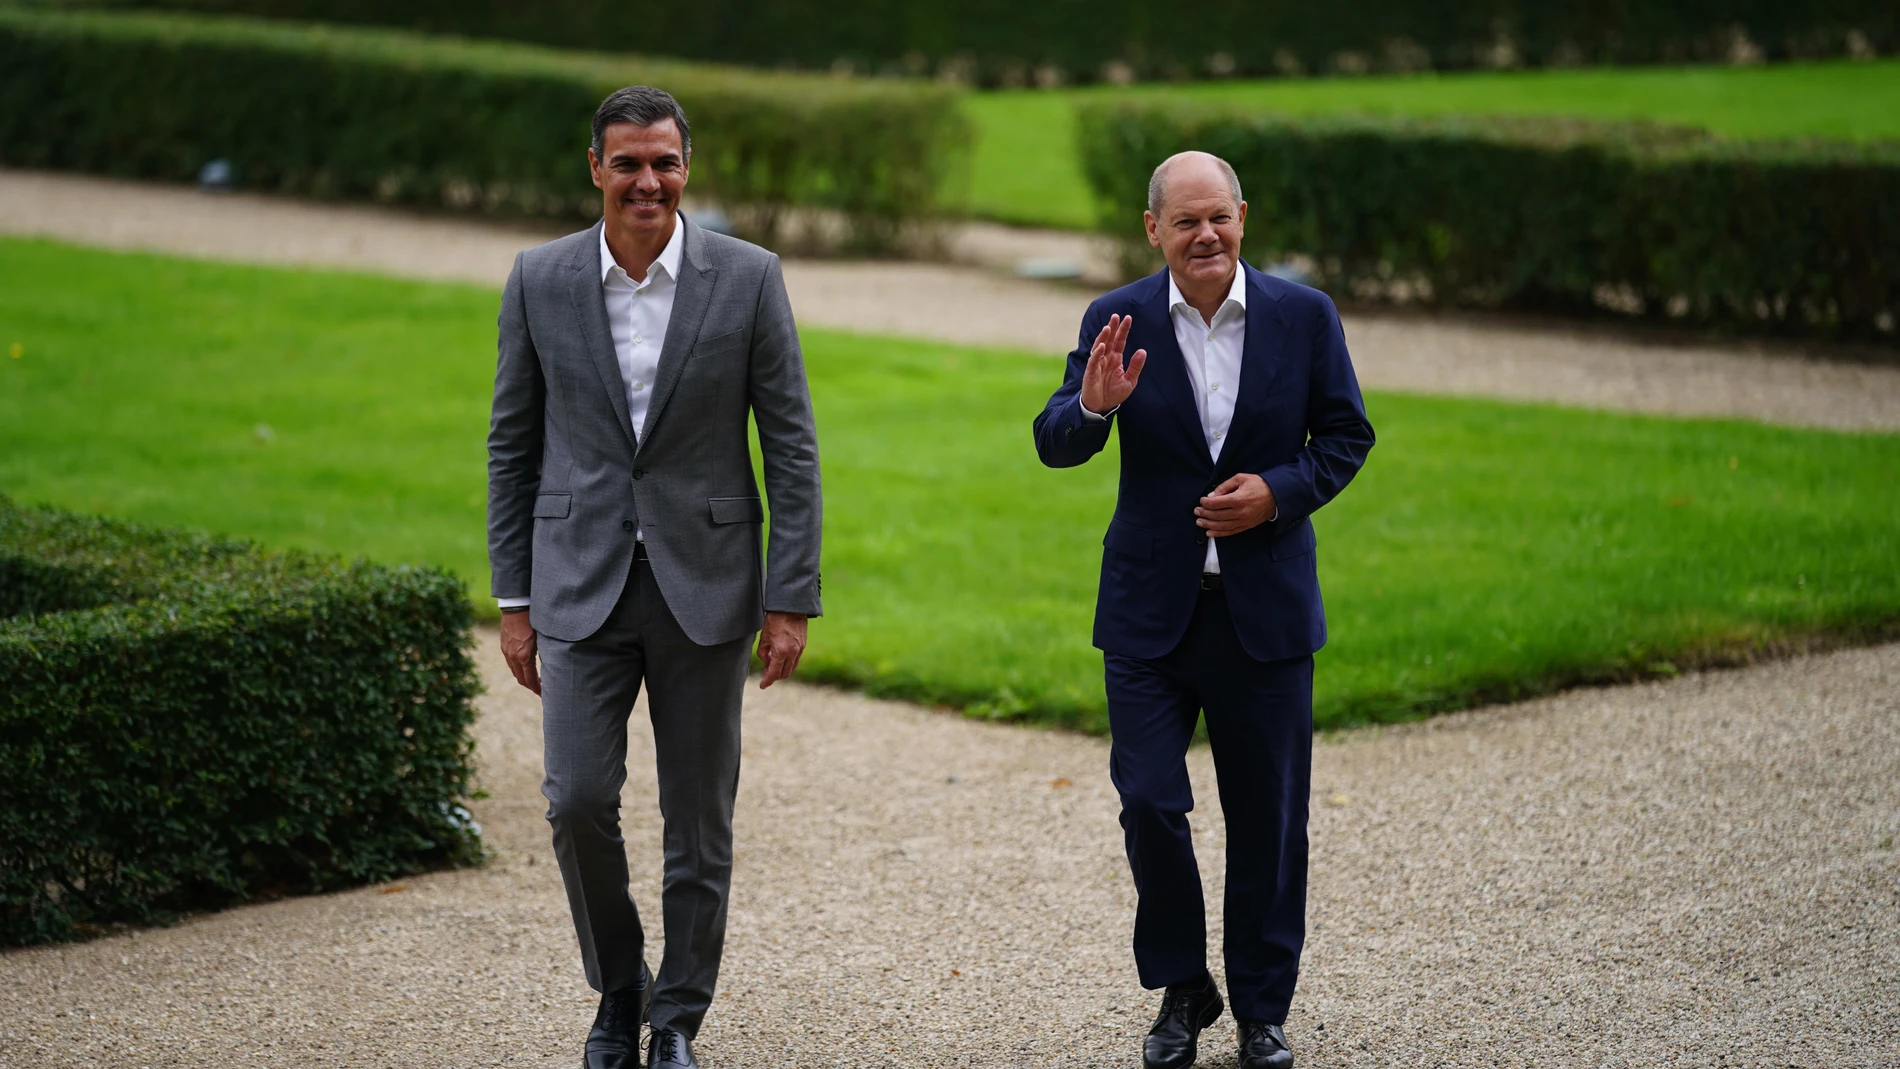 Meseberg (Germany), 30/08/2022.- German Chancellor Olaf Scholz (R) waves to journalists next to Spanish Prime Minister Pedro Sanchez during a walk in the garden on the occasion of a closed meeting of the federal cabinet in Meseberg, Germany, 30 August 2022. The German government meets for a two day retreat at the guest house of the German government in Meseberg near Berlin. (Alemania) EFE/EPA/CLEMENS BILAN